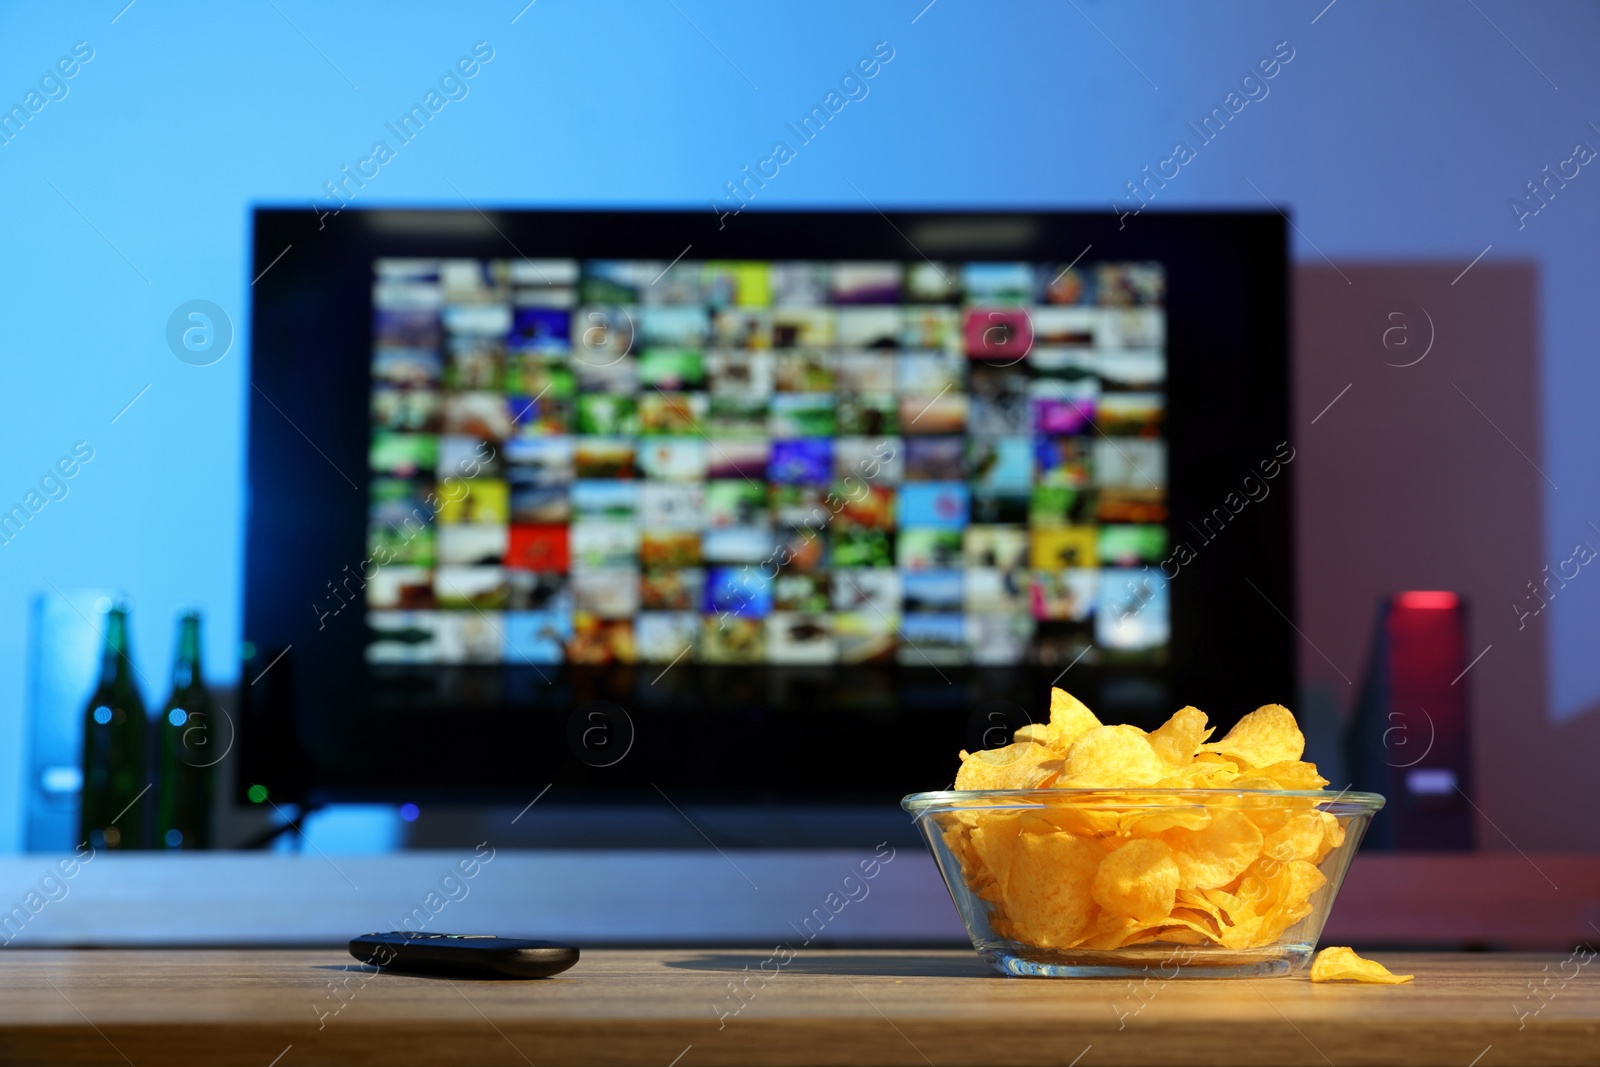 Photo of Bowl of chips and TV remote control on table indoors. Space for text